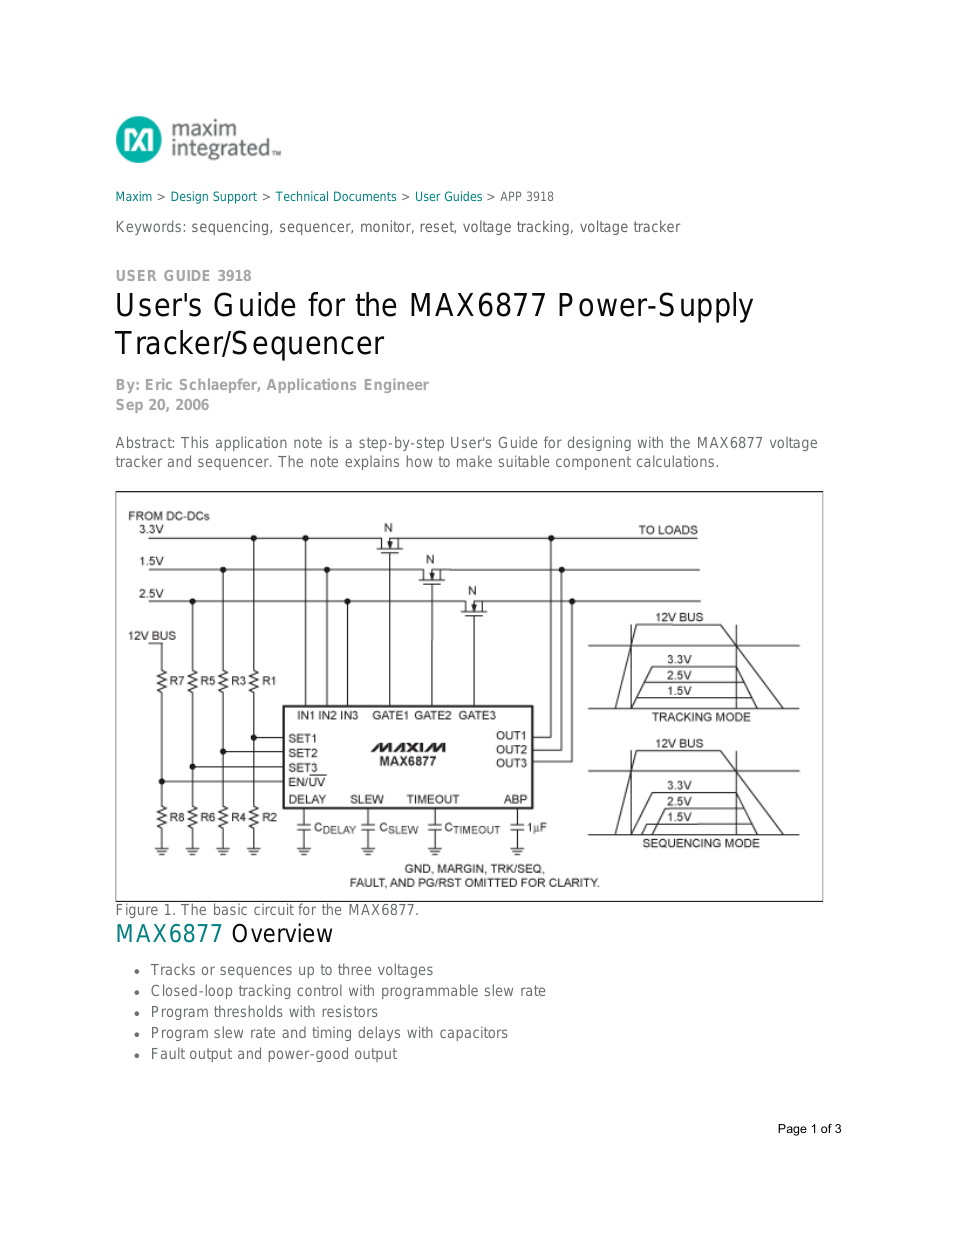 Power-Supply Tracker/Sequencer MAX6877